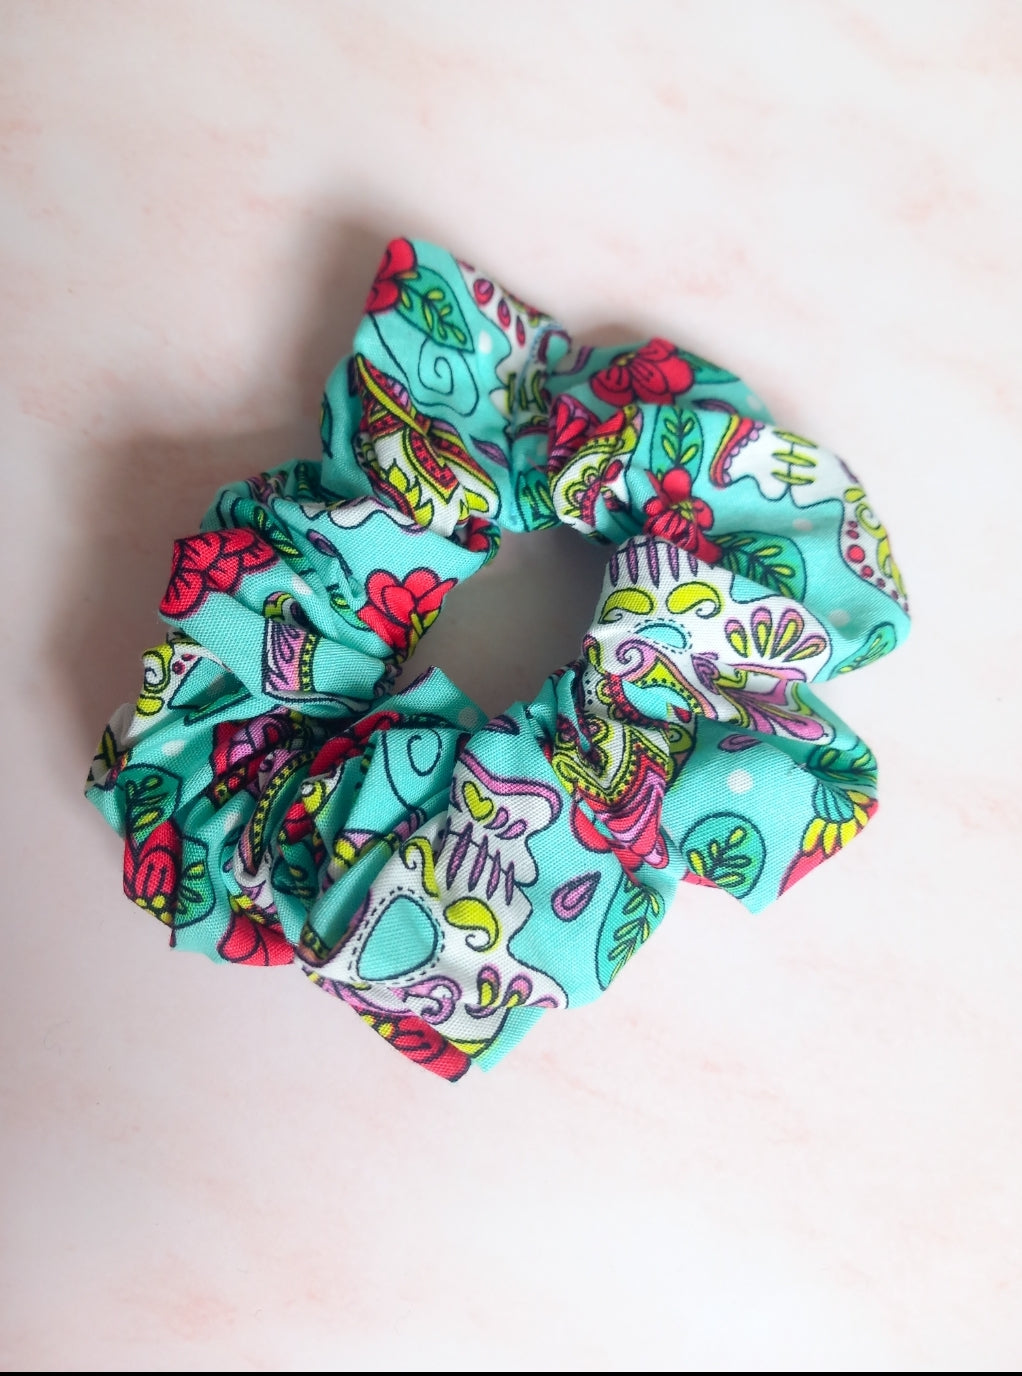 Frida Kahlo & Day of the Dead Summer Small Scrunchies